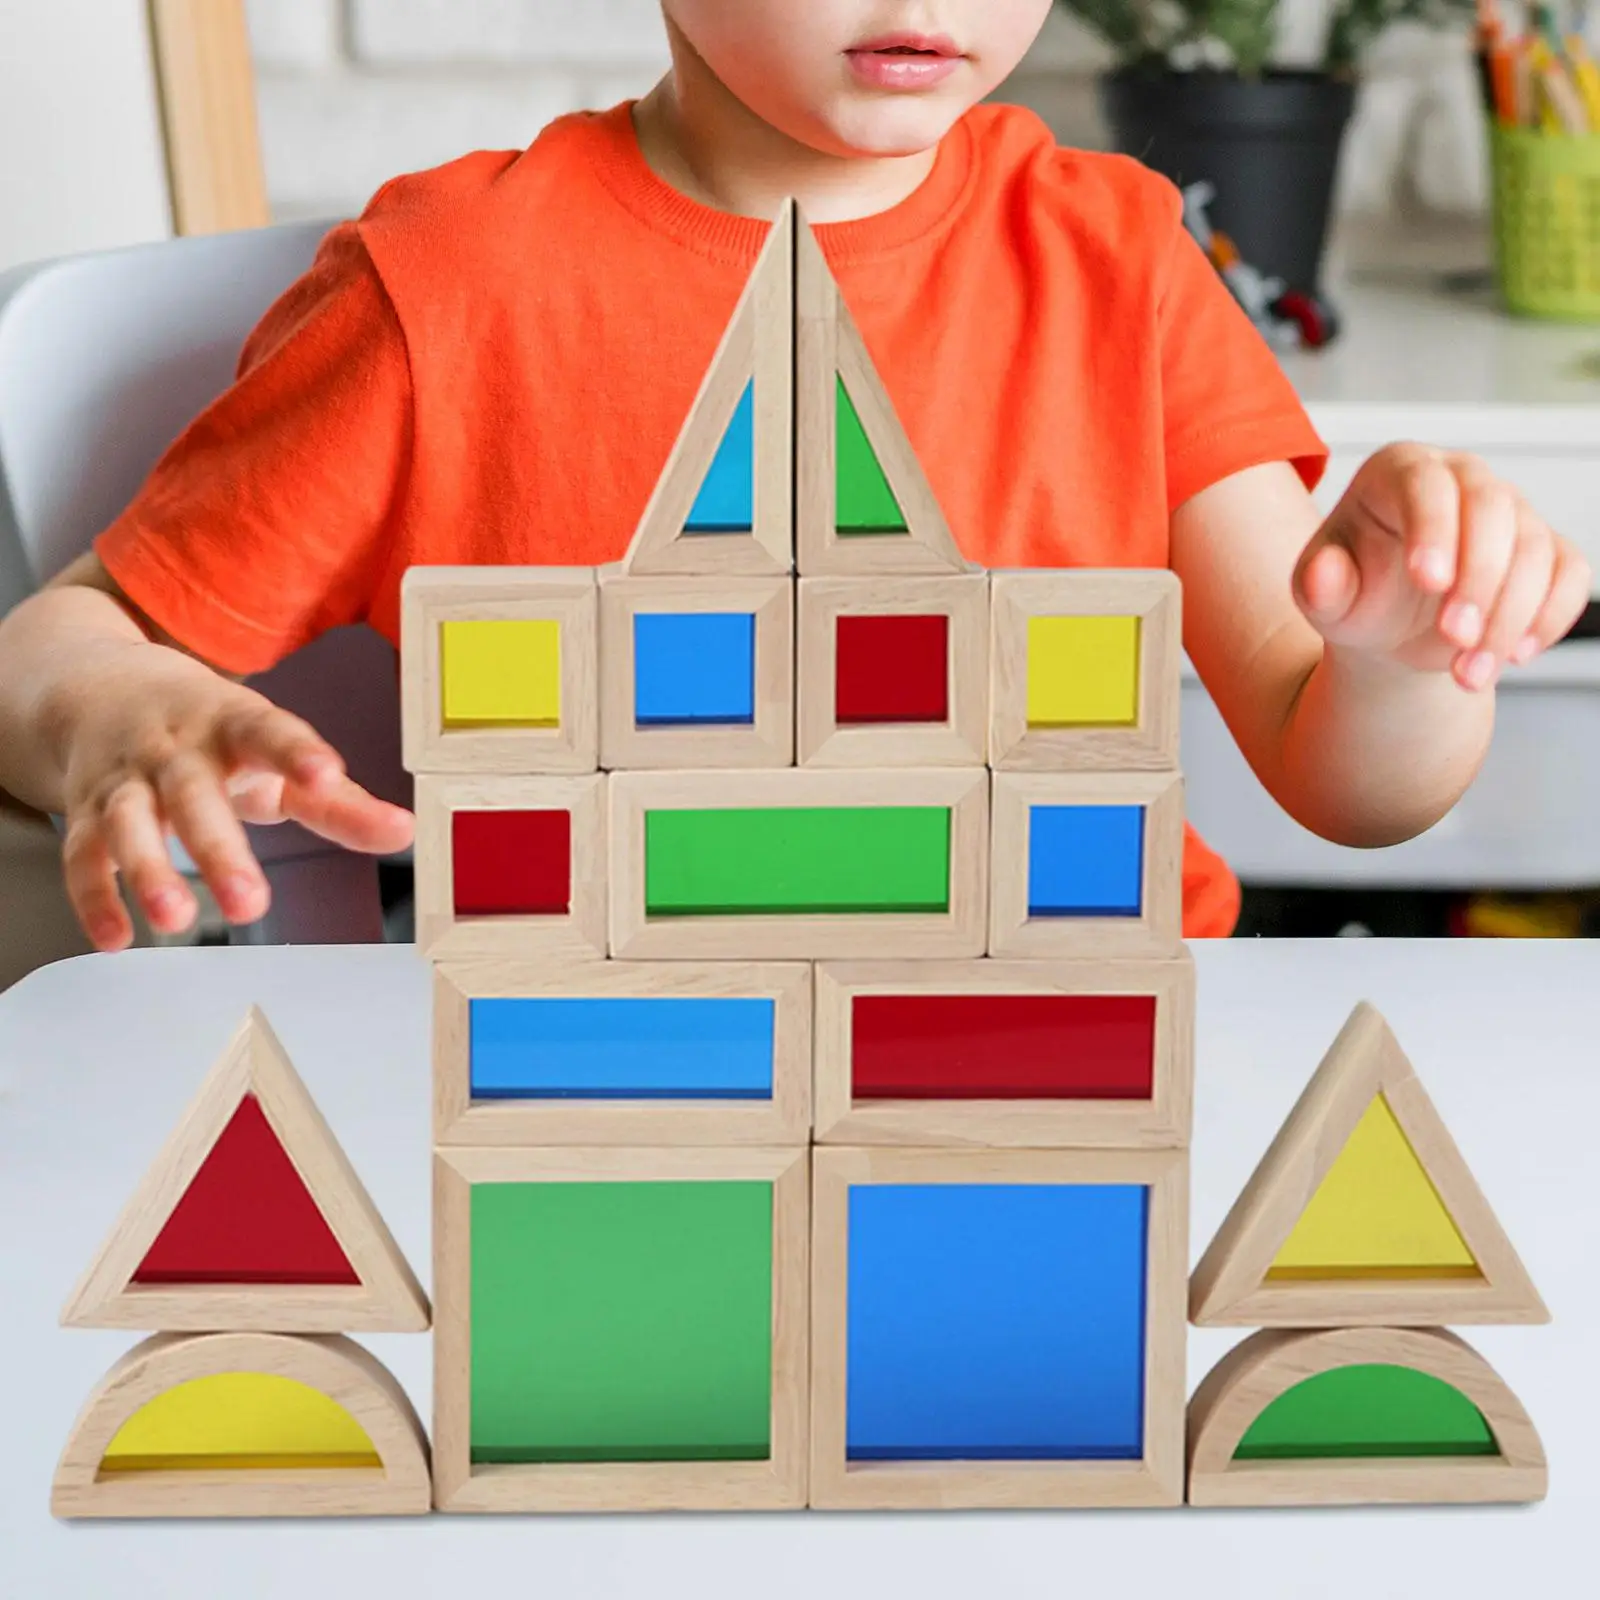 17 Pieces Wood Building Blocks Set 2 3 4 Year Old Educational Toys Fine Motor Skills Boys Girls Stacking Game Construction Toys